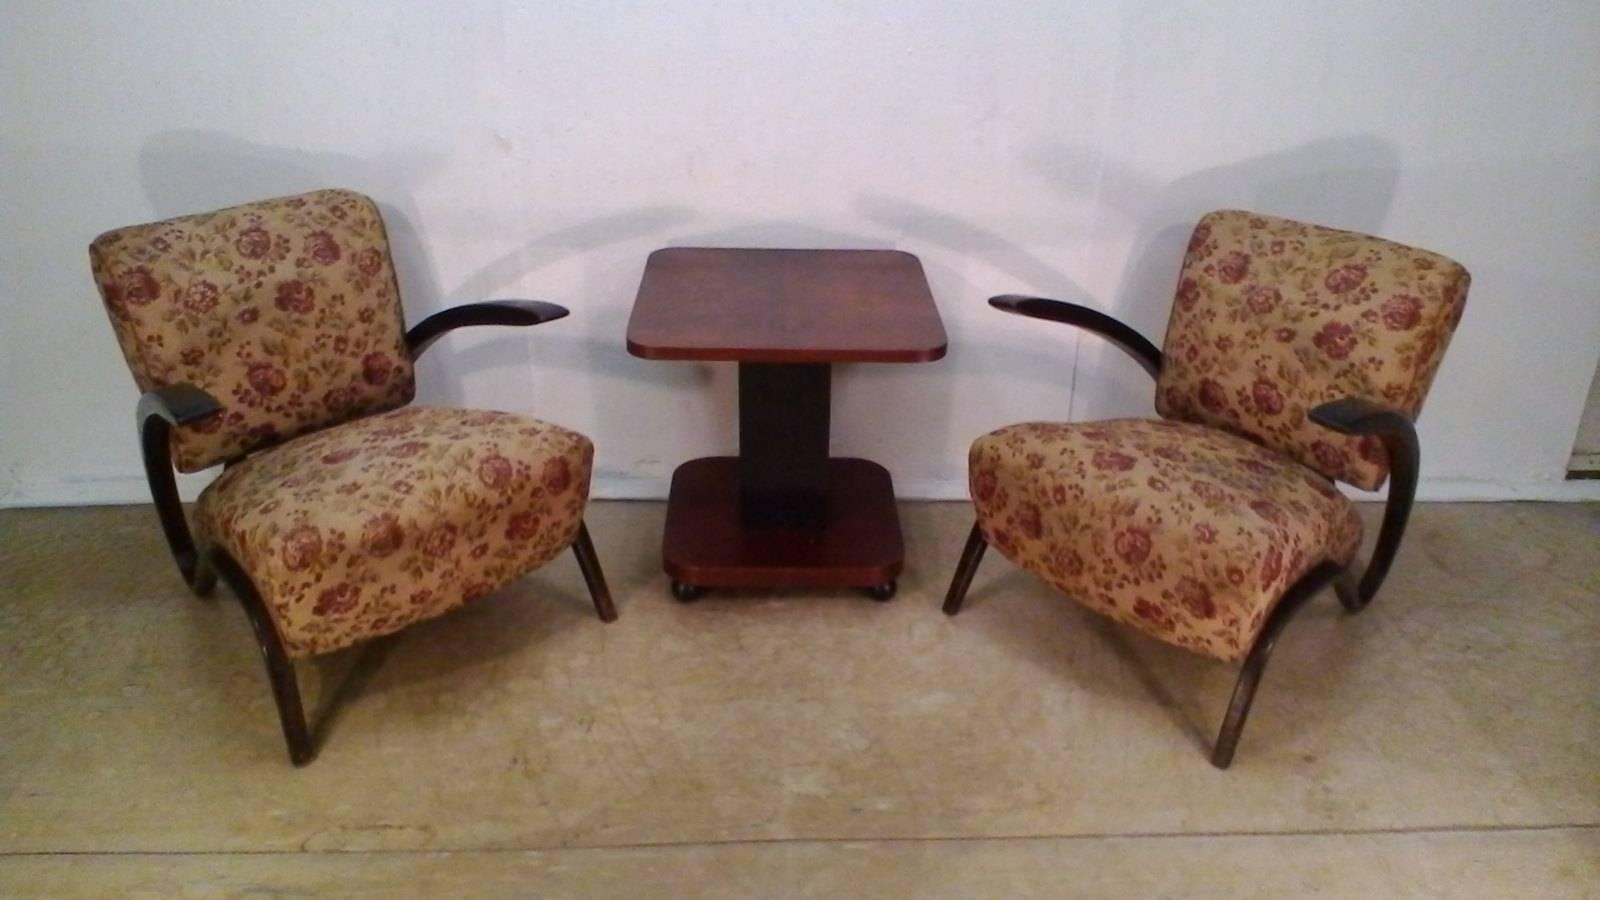 Both H-275 armchairs and coffee table are in very good original condition .The coffee table dimensions (walnut veneer) are: H: 58 cm x W: 57 cm D: 57 cm.